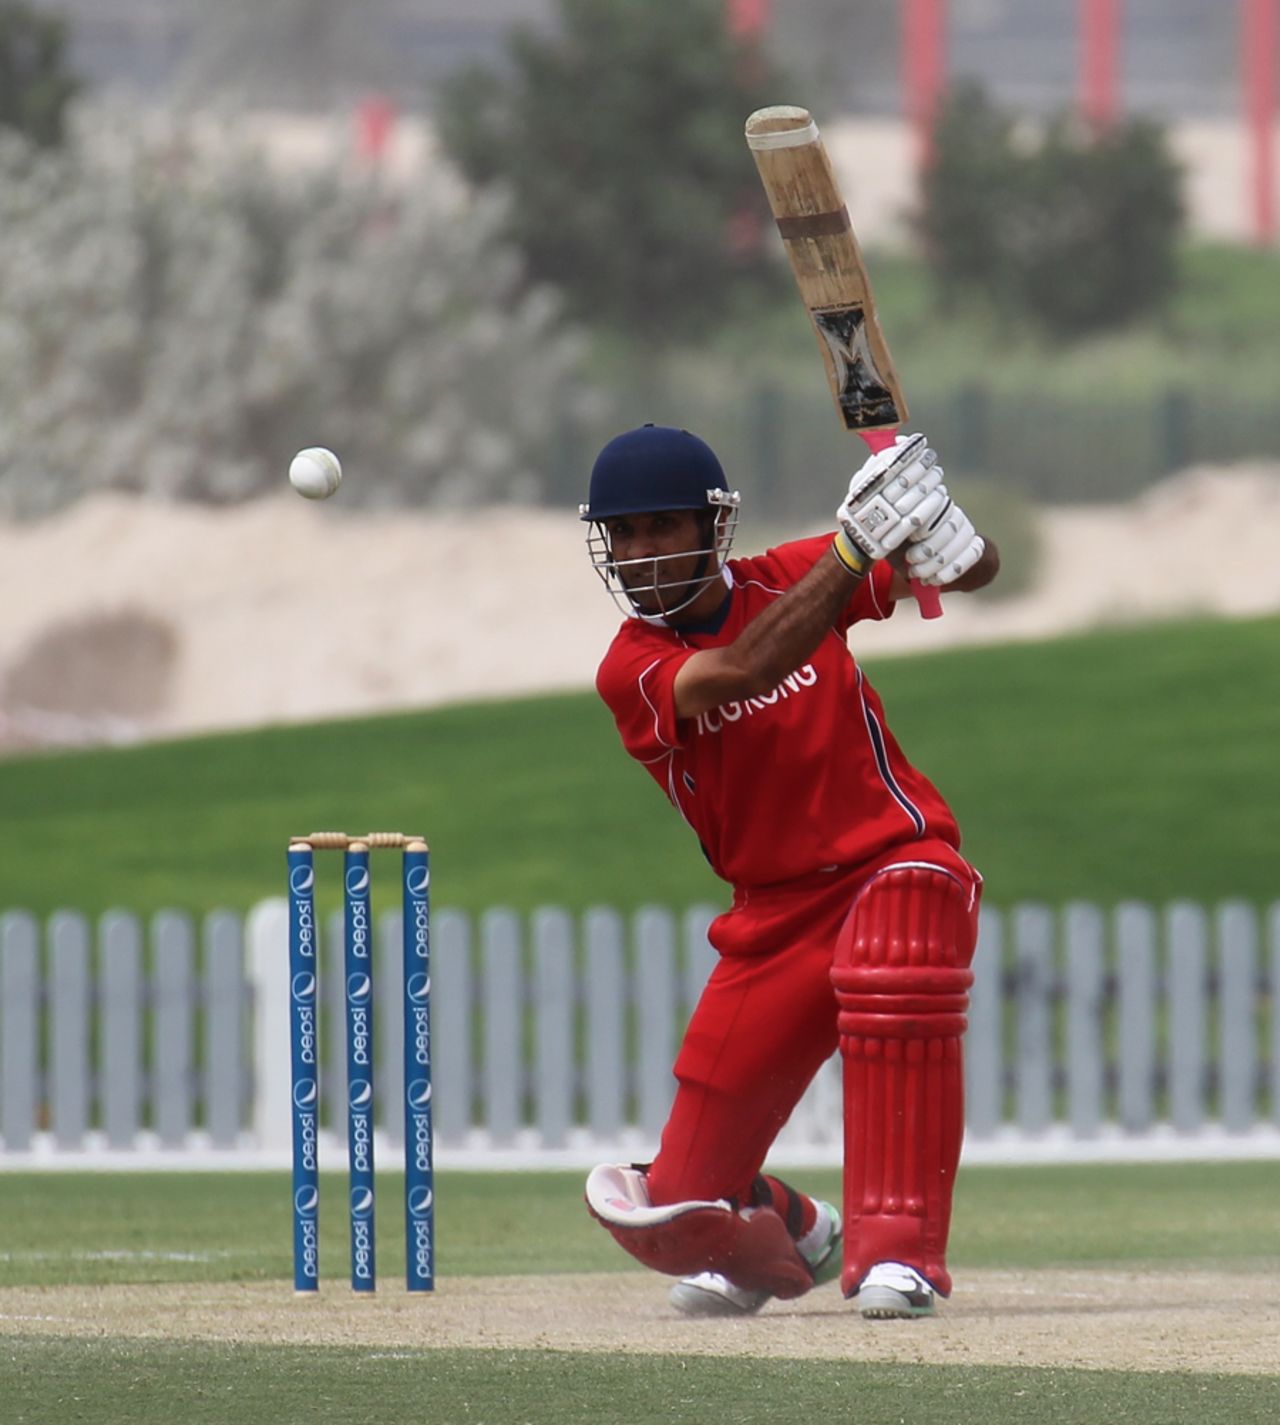 Hussain Butt drives the ball against PNG in the 3rd/4th Play-off match at the ICC WCL2 in Dubai on 15th April 2011